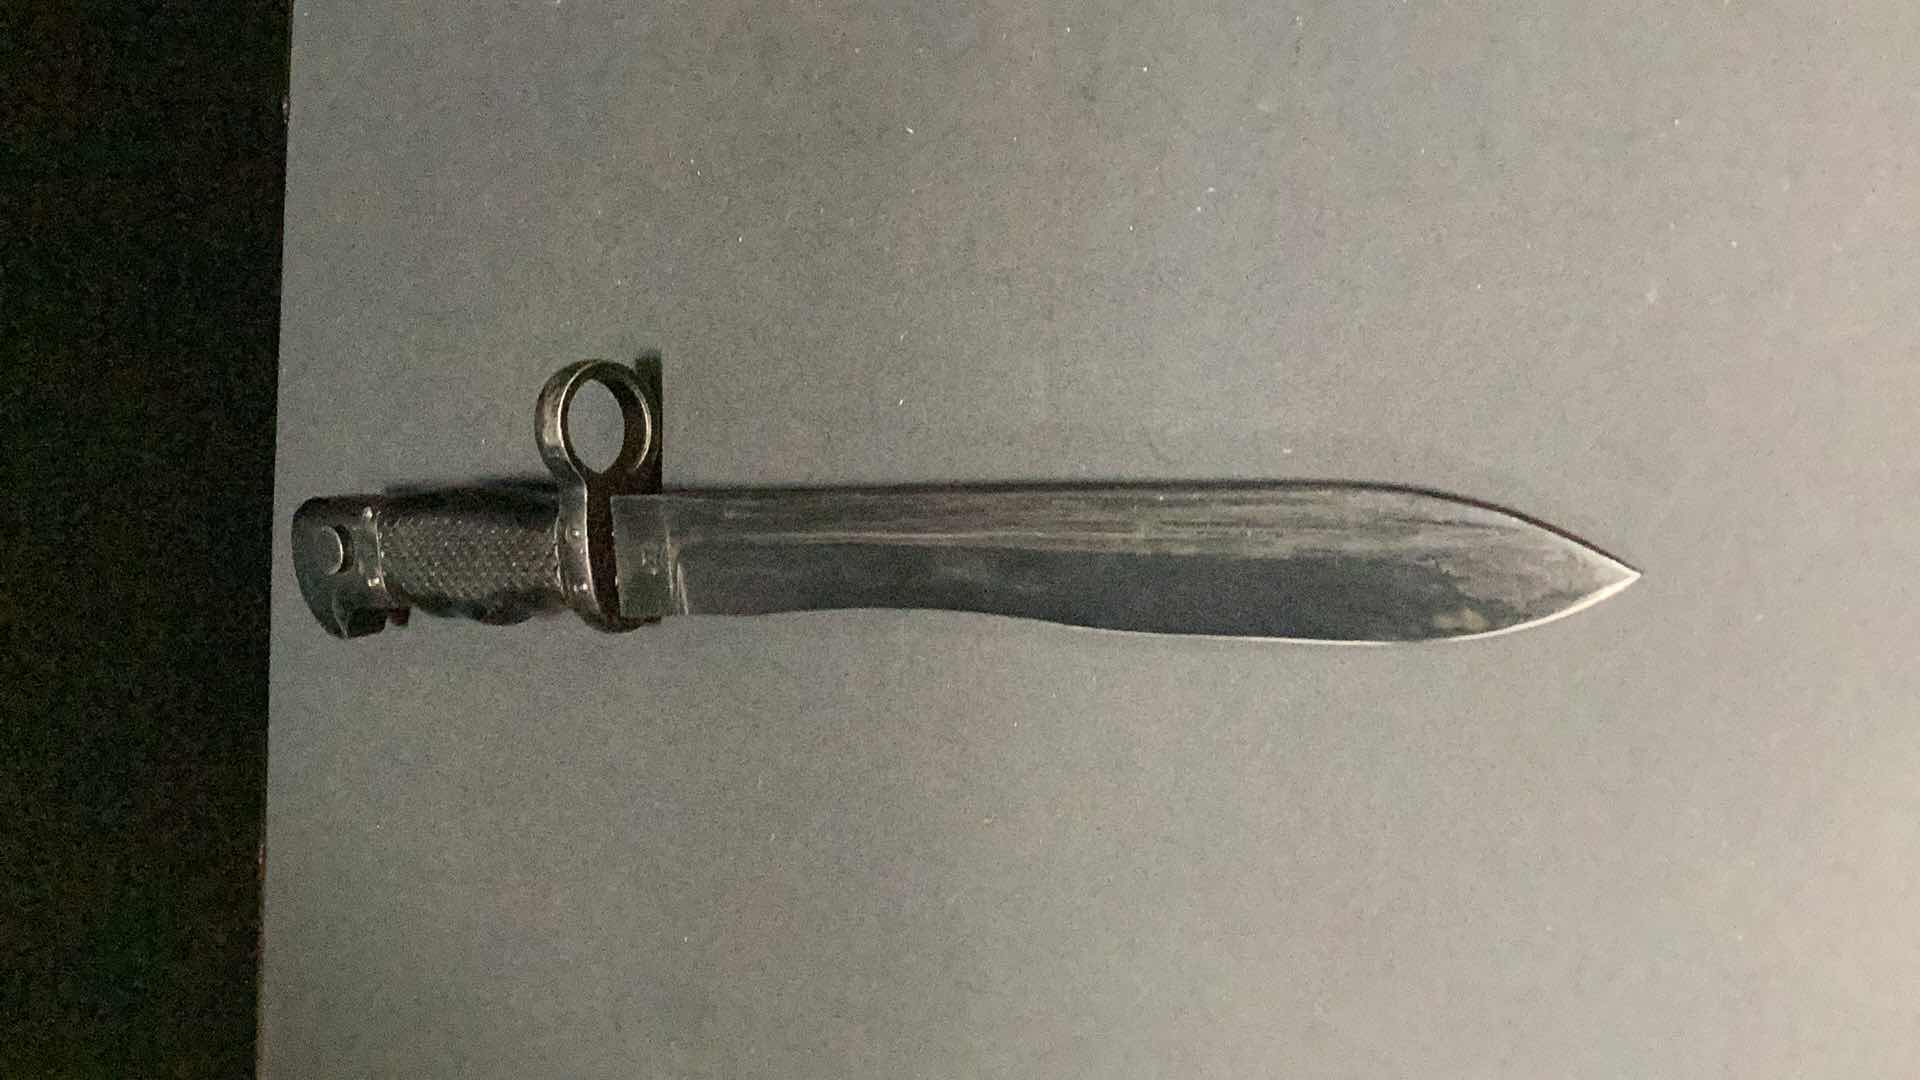 Photo 2 of ARMY BAYONET 13” WITH SCABBARD